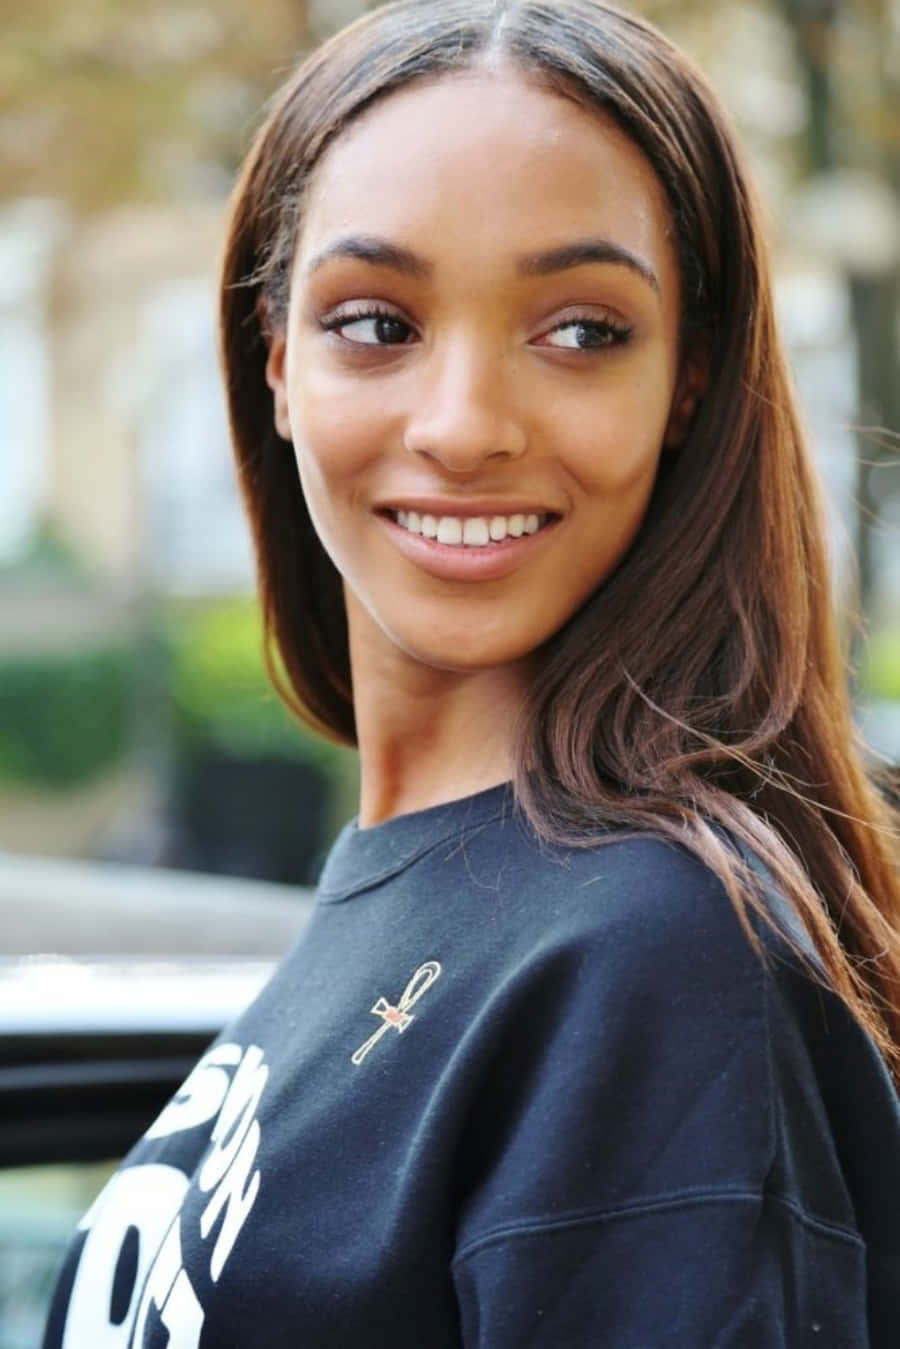 Fashionable Jourdan Dunn Posing With A Confident Smile. Wallpaper